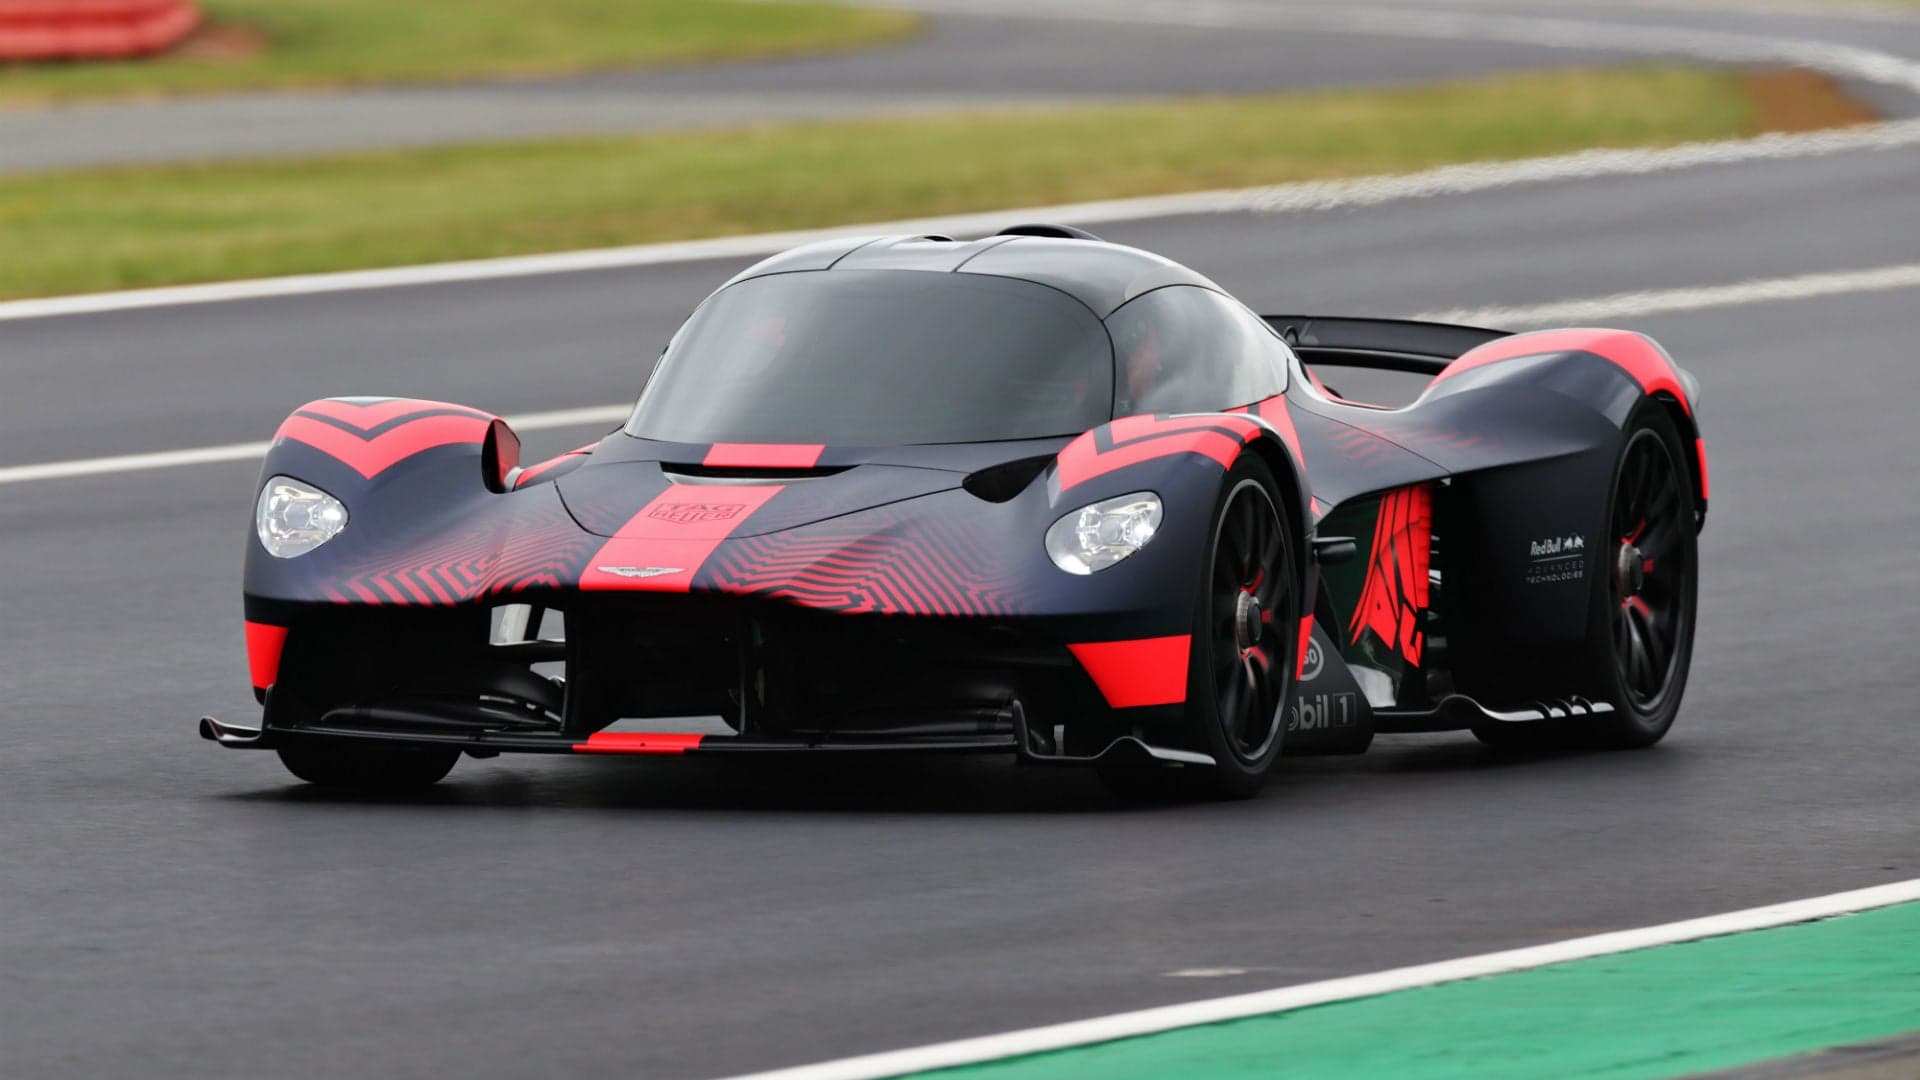 1,160-HP Aston Martin Valkyrie Hypercar Makes Track Debut at Silverstone